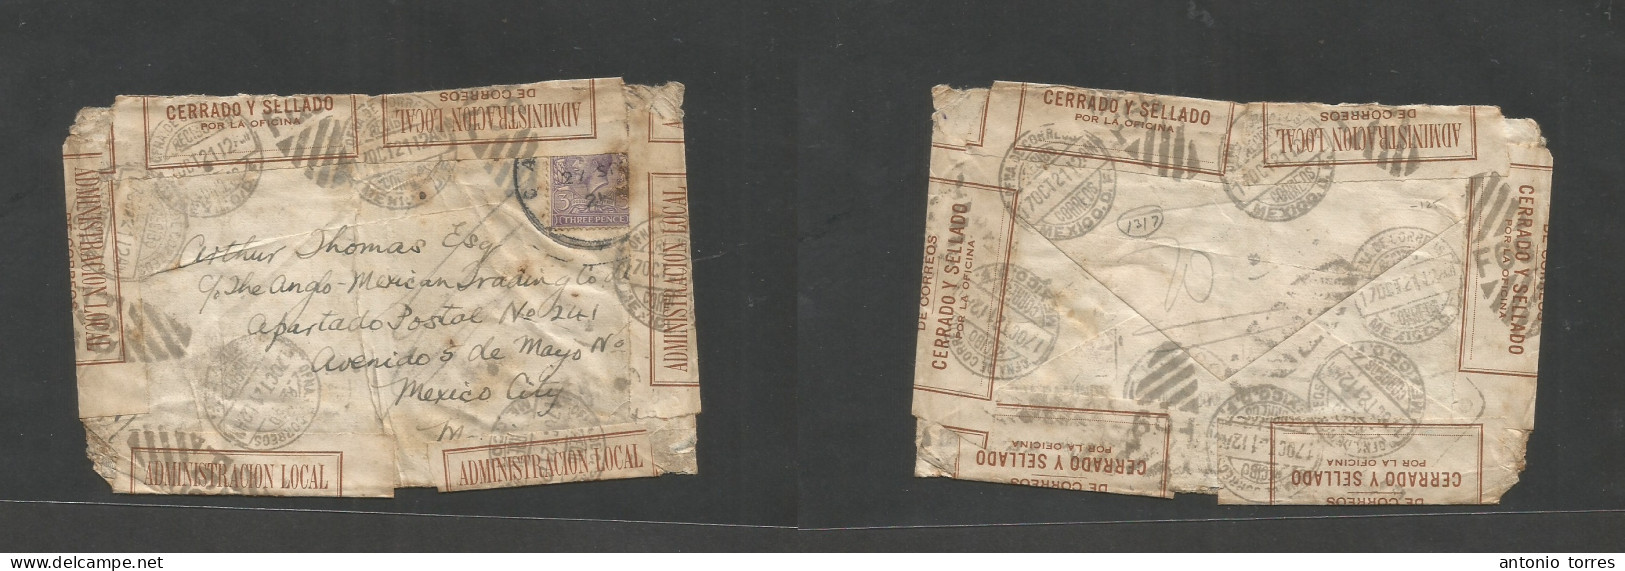 Mexico - Xx. 1921 (27 Sept) GB - DF (7 Oct) 3d Lilac Fkd Env. Arrived Opened At Edges And Sealed By Mexican Post Office - Mexique